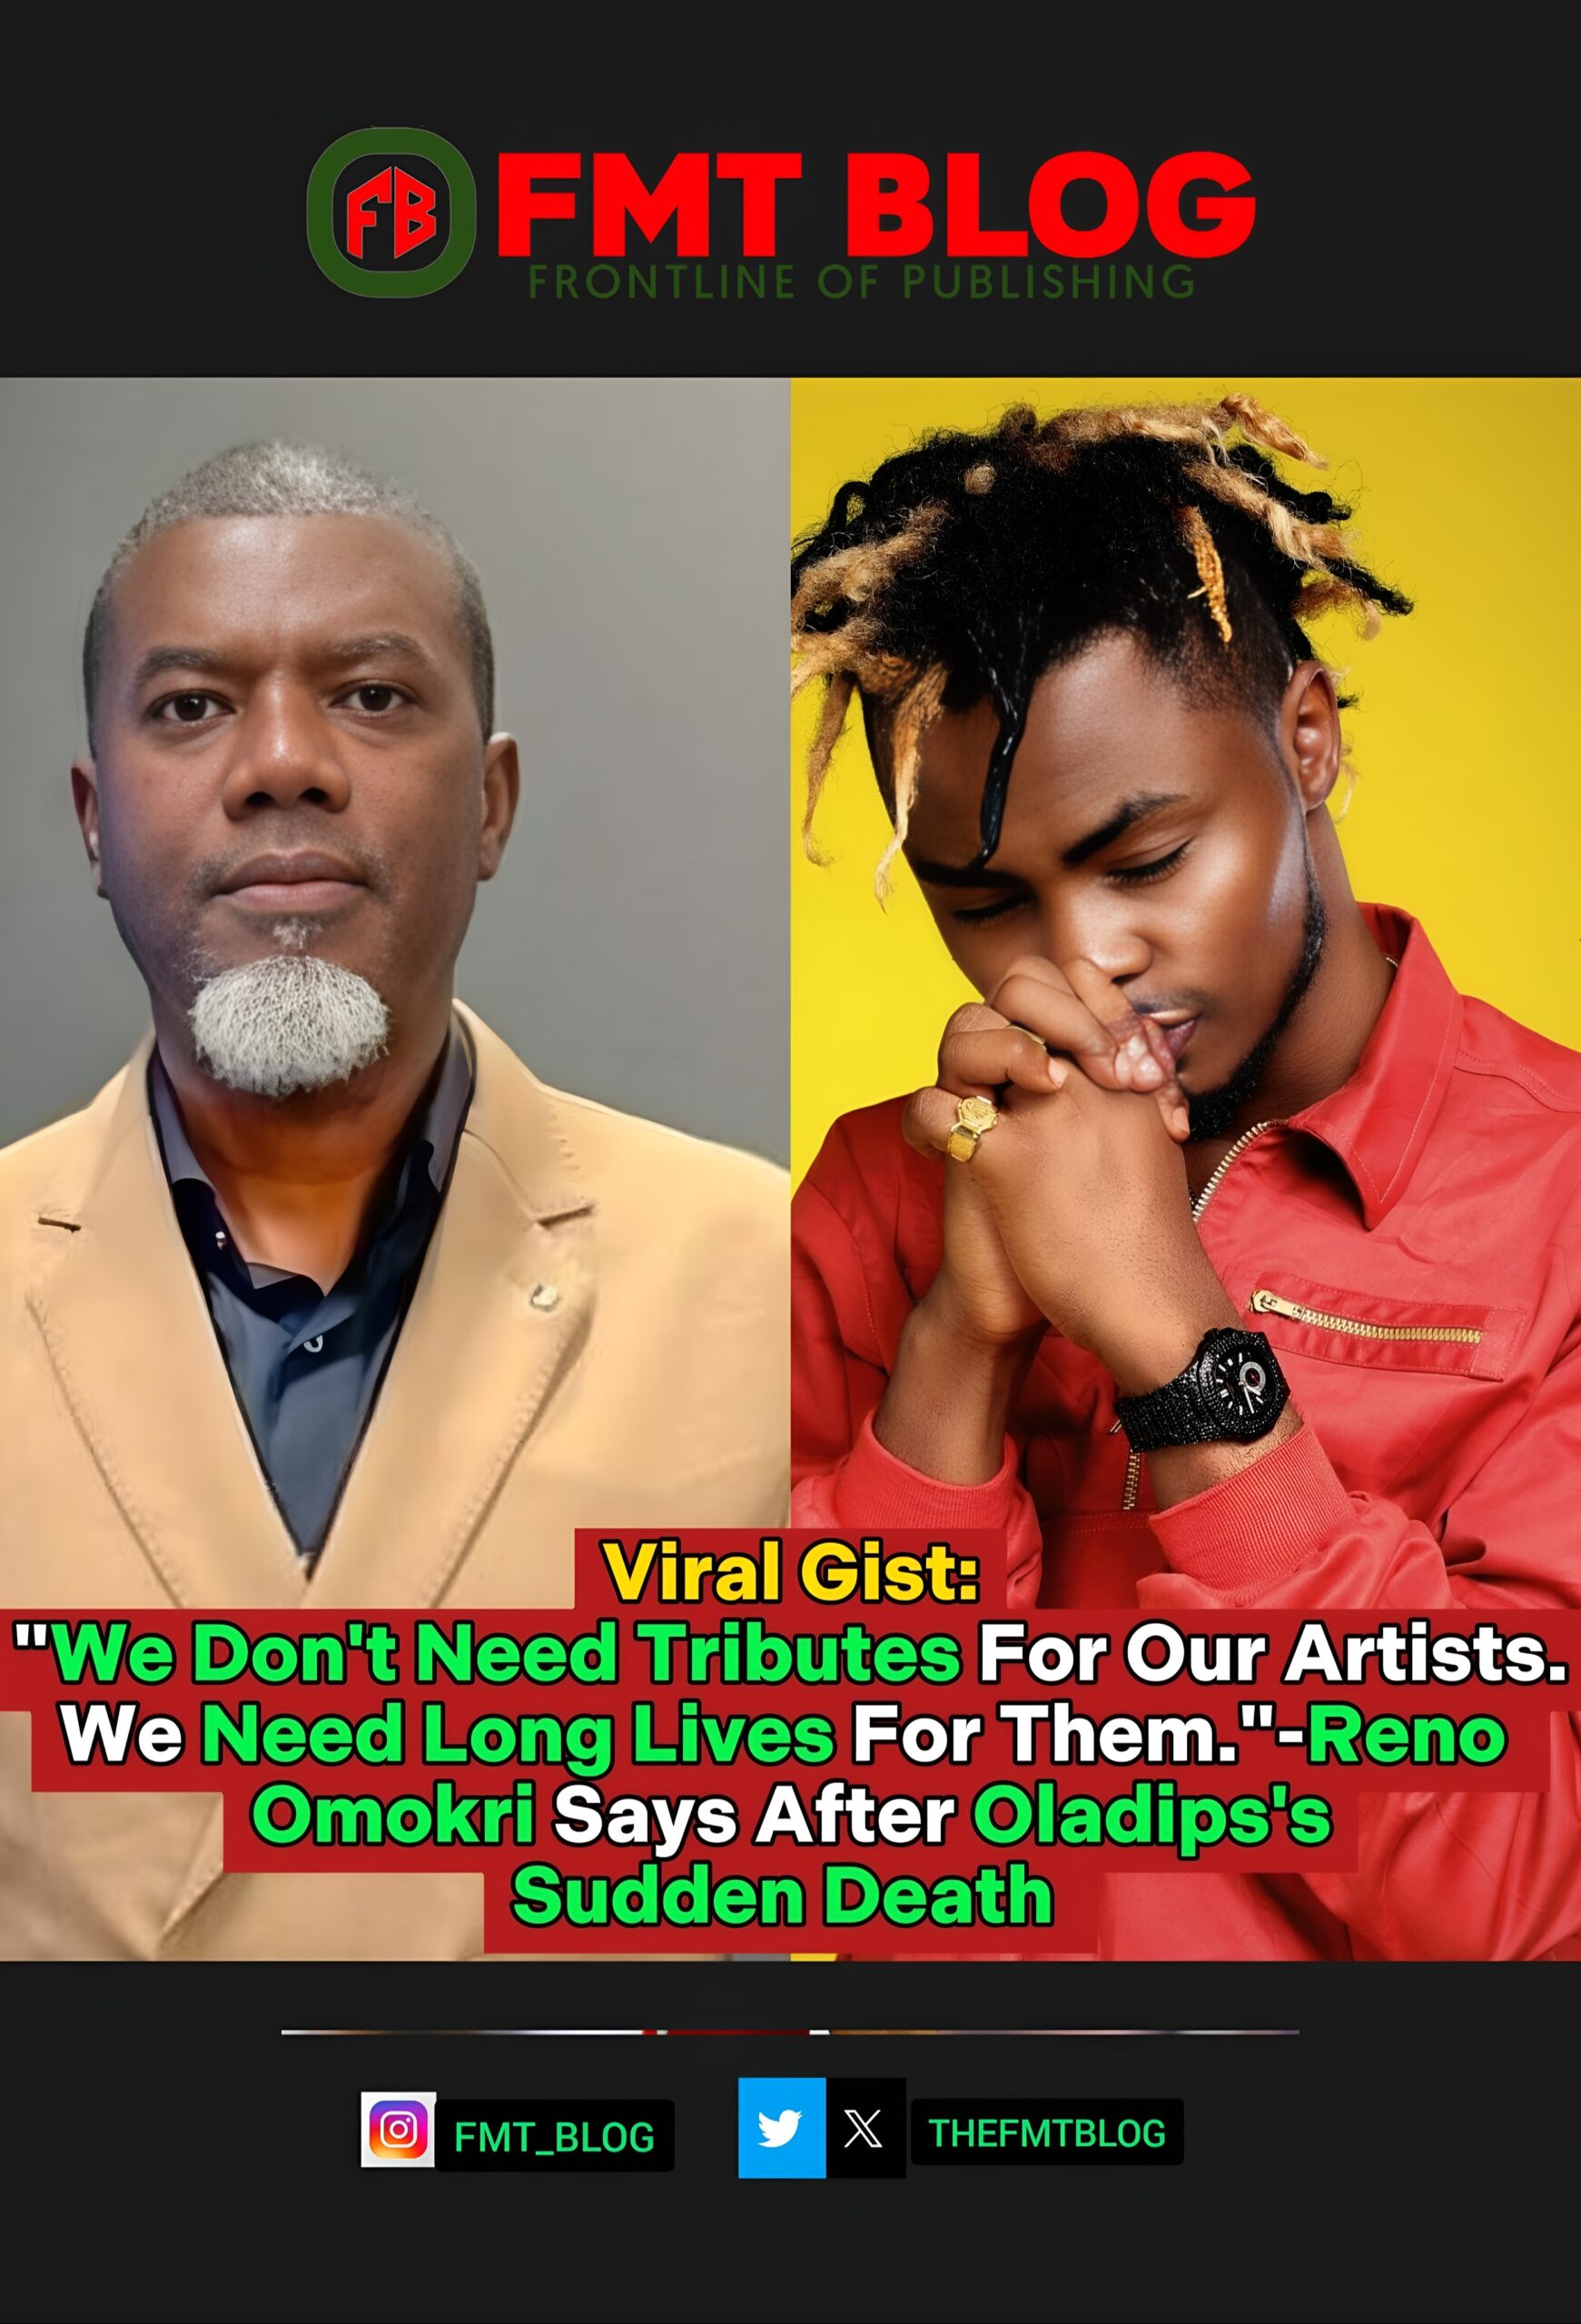 ”We Don’t Need Tributes For Our Artists. We Need Long Lives For Them.”-Reno Omokri Says After Oladips’s Sudden Death